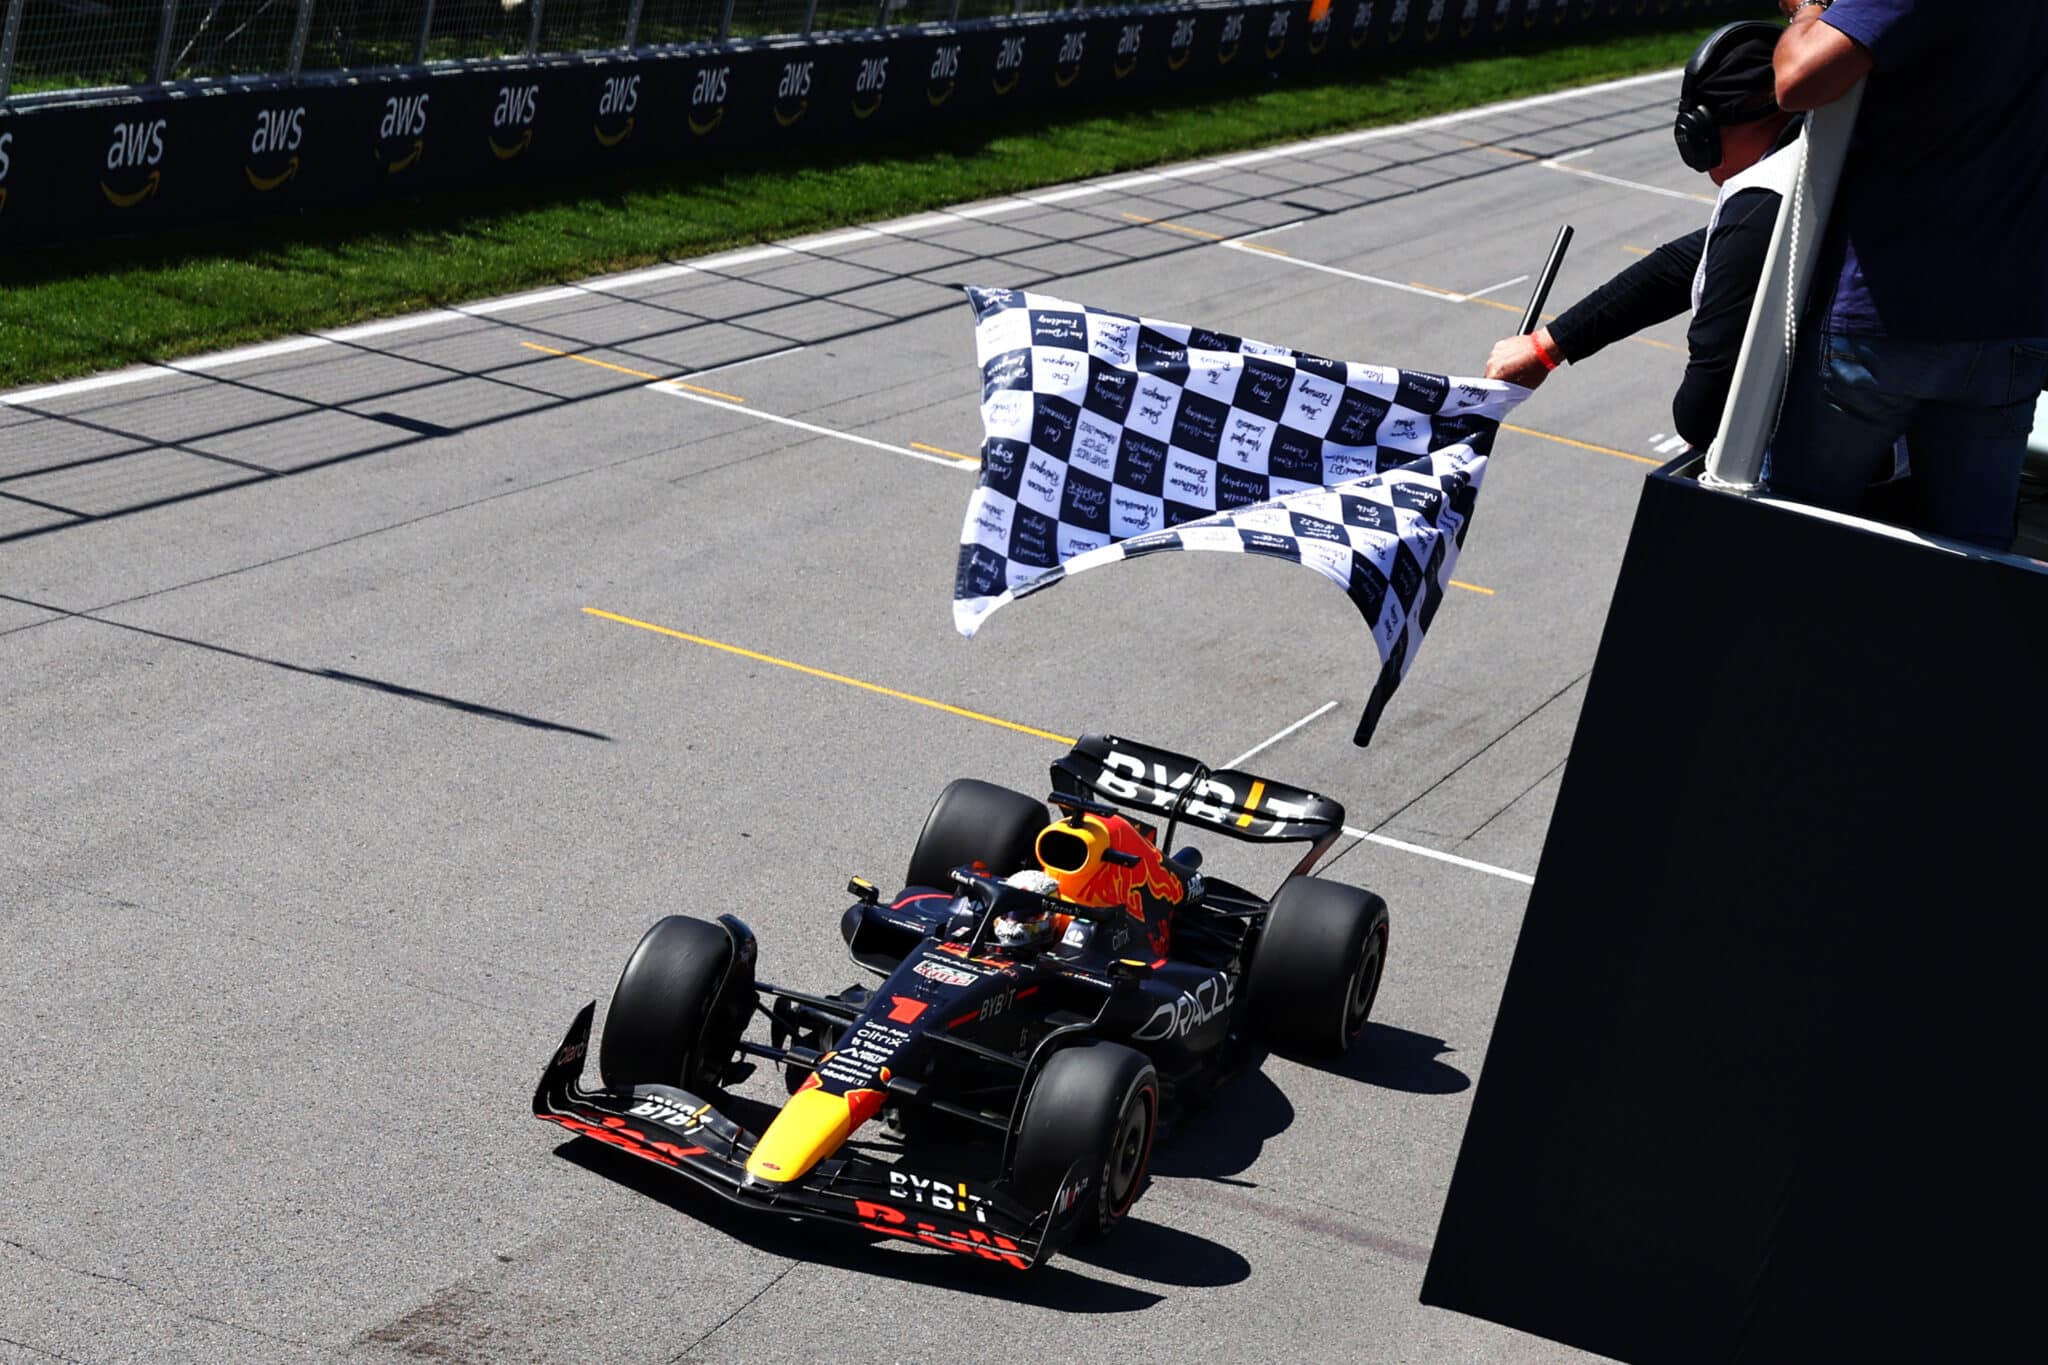 - Chequered Flag in F1 Racing: The End of the Race and Victory